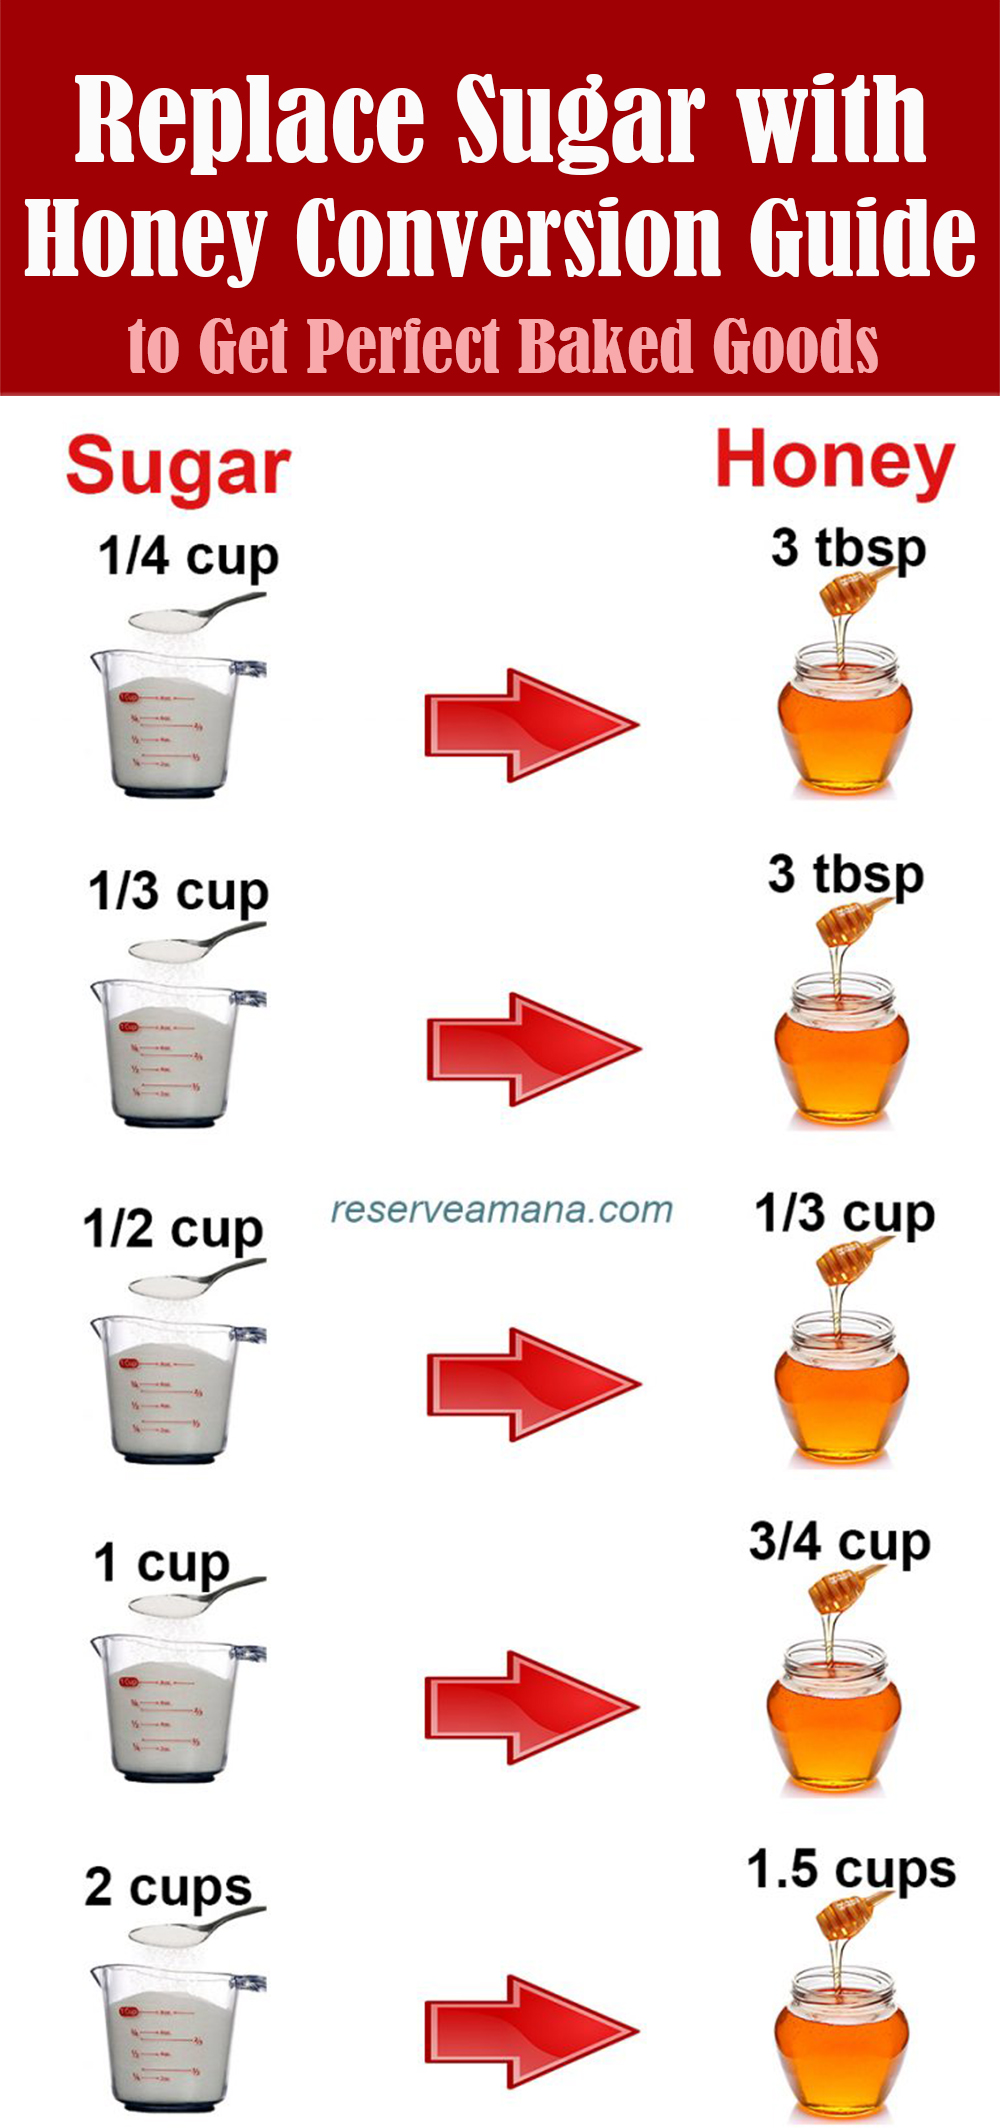 Conversion Chart How to Substitute Sugar with Honey to Get Perfect Baked Goods